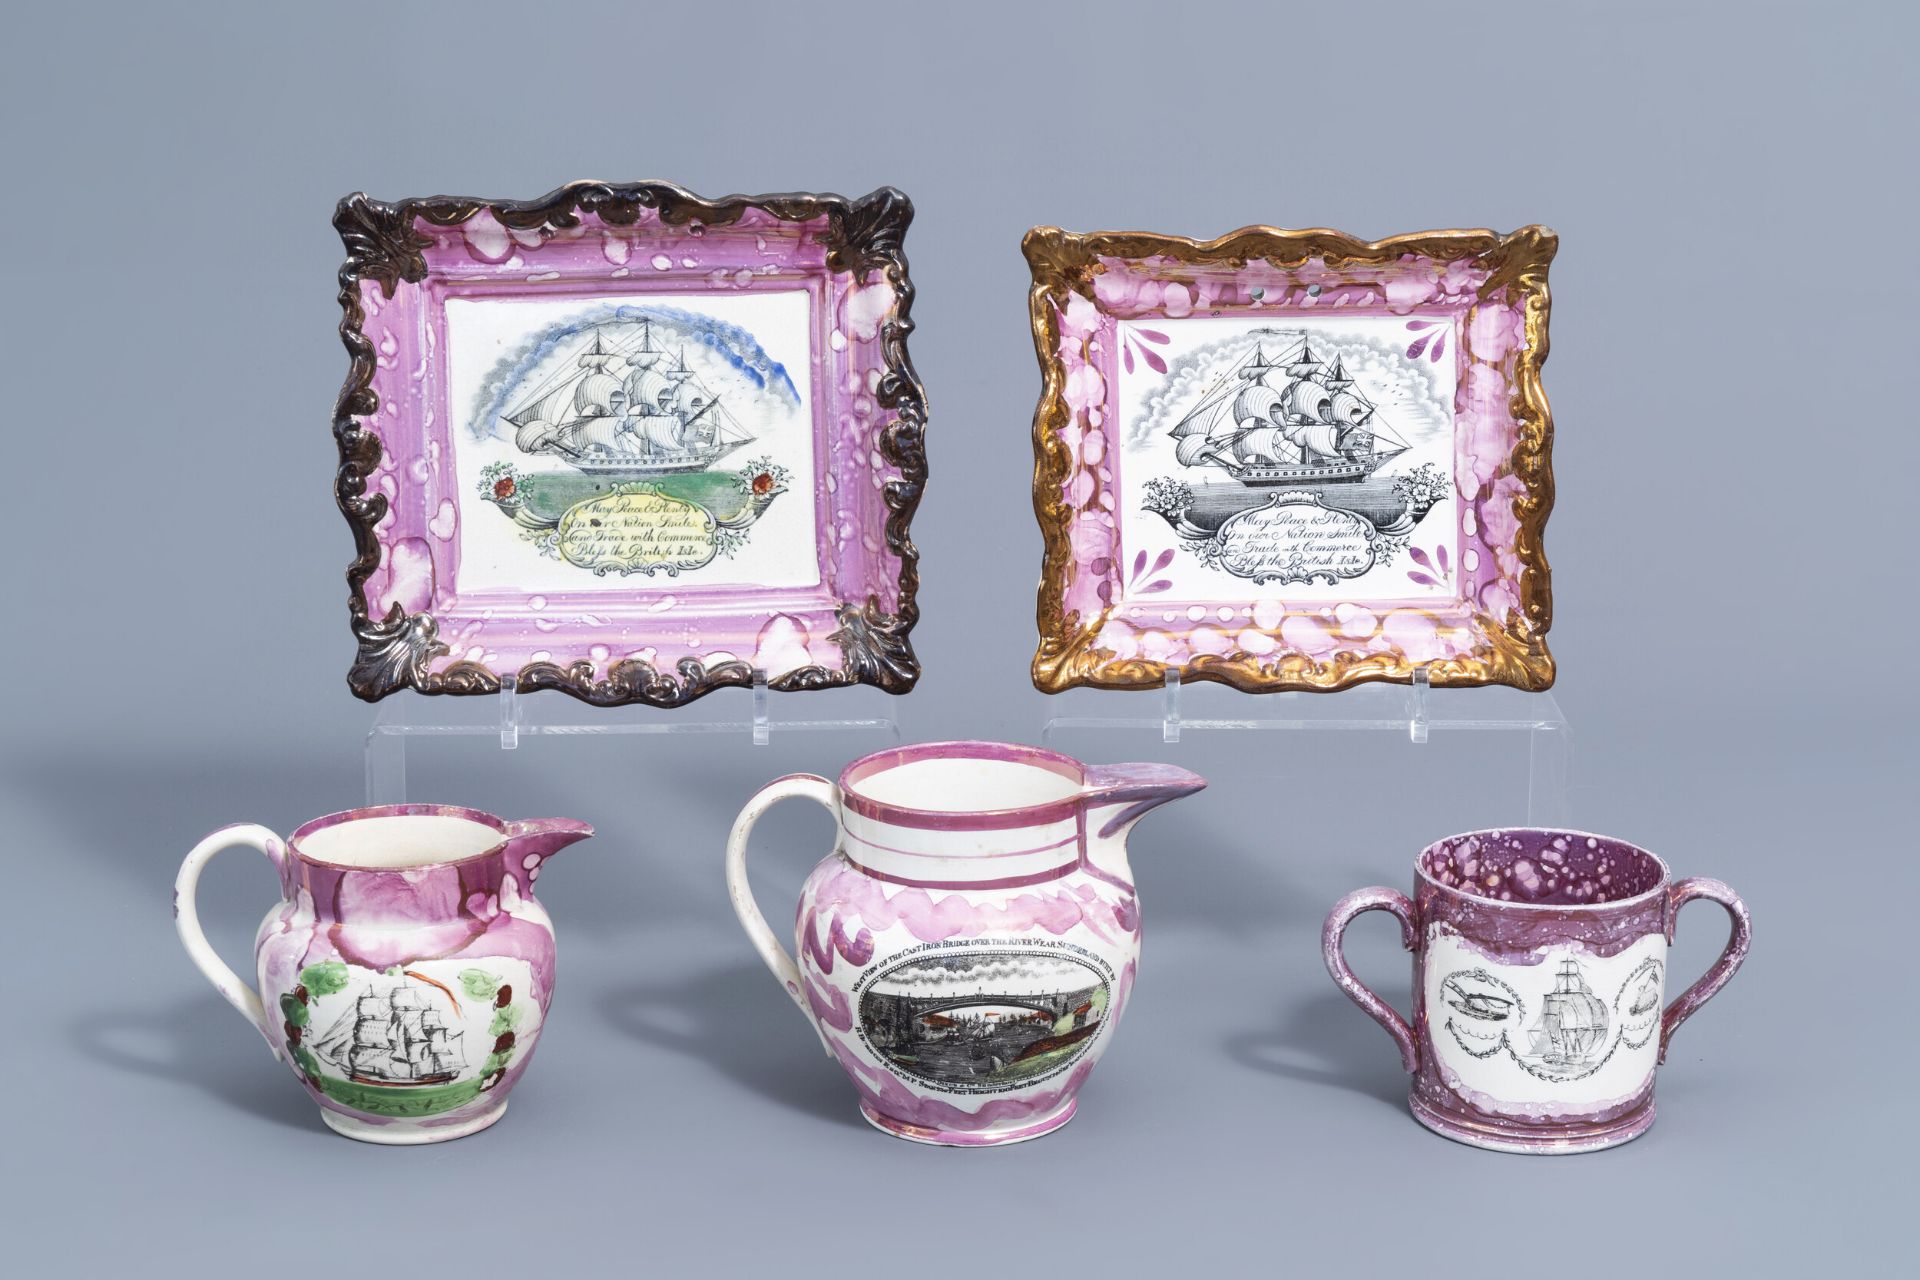 A varied collection of English lustreware items with boats, 19th C.